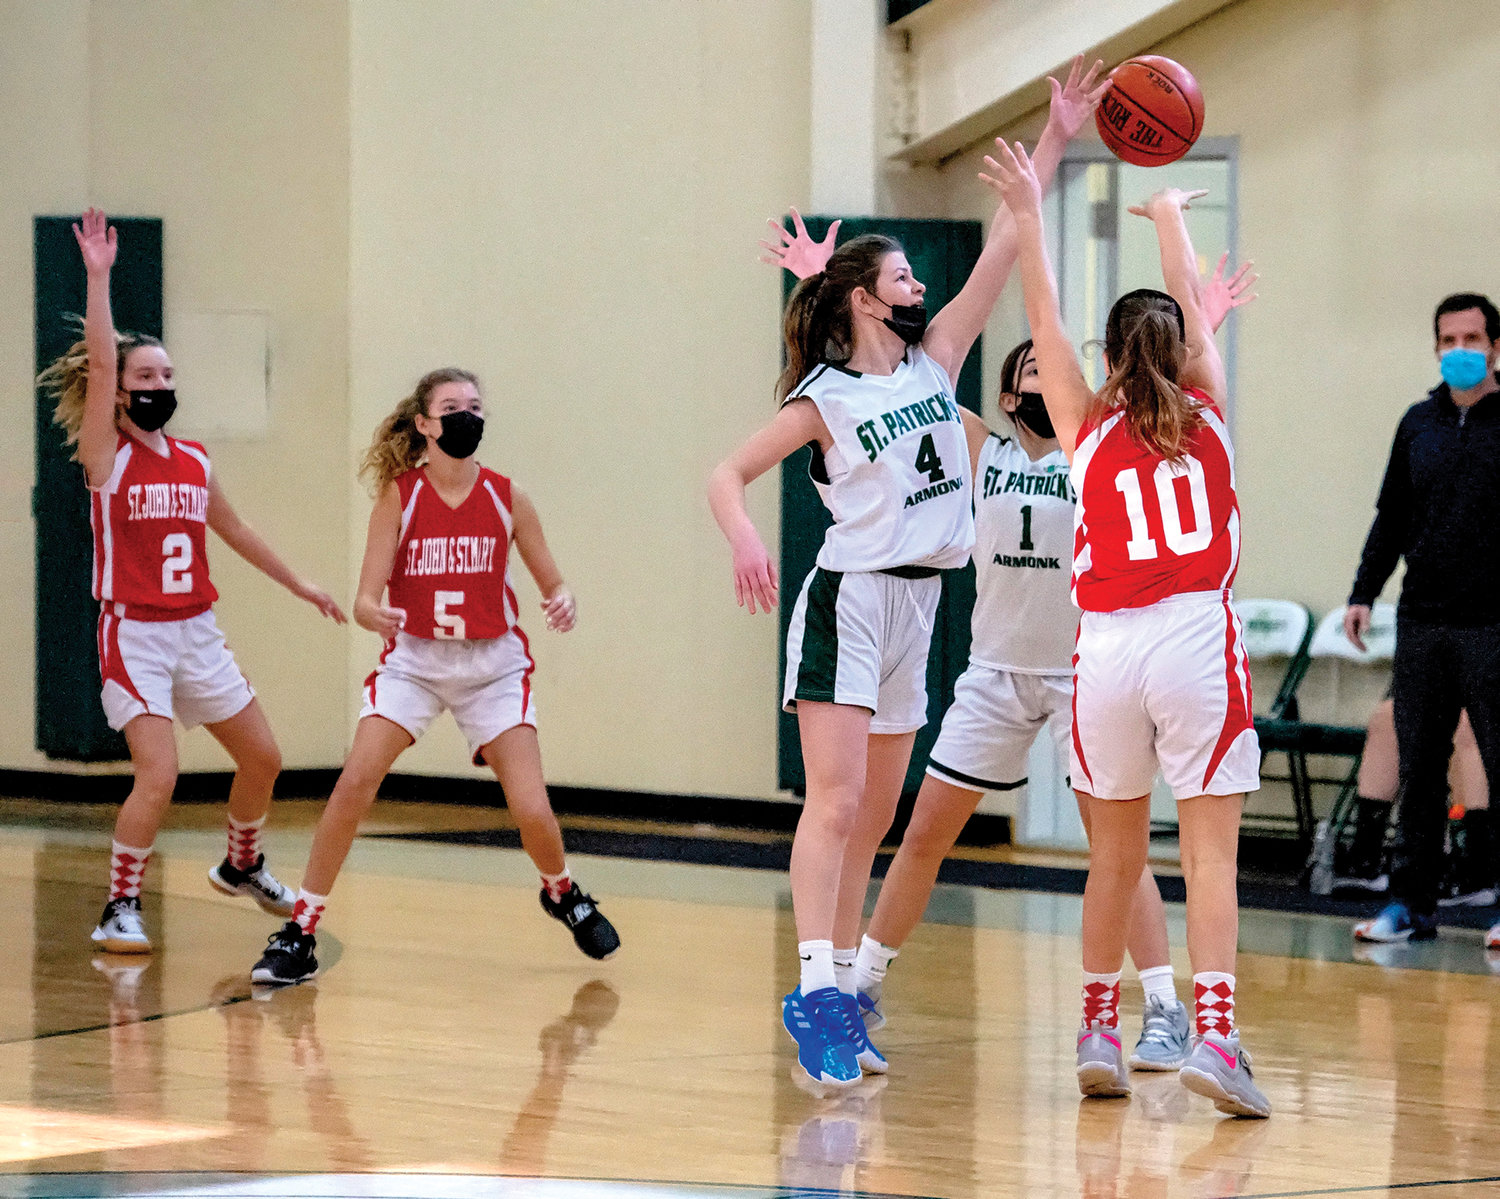 Avery Fitzgerald of St. John and St. Mary in Chappaqua looks to make a pass through St. Patrick defenders Lucy Brescio, left, and Brielle Delgrosso during a CYO eighth-grade girls basketball game at St. Patrick’s in Armonk Feb. 5. St. Patrick’s won, 28-26.